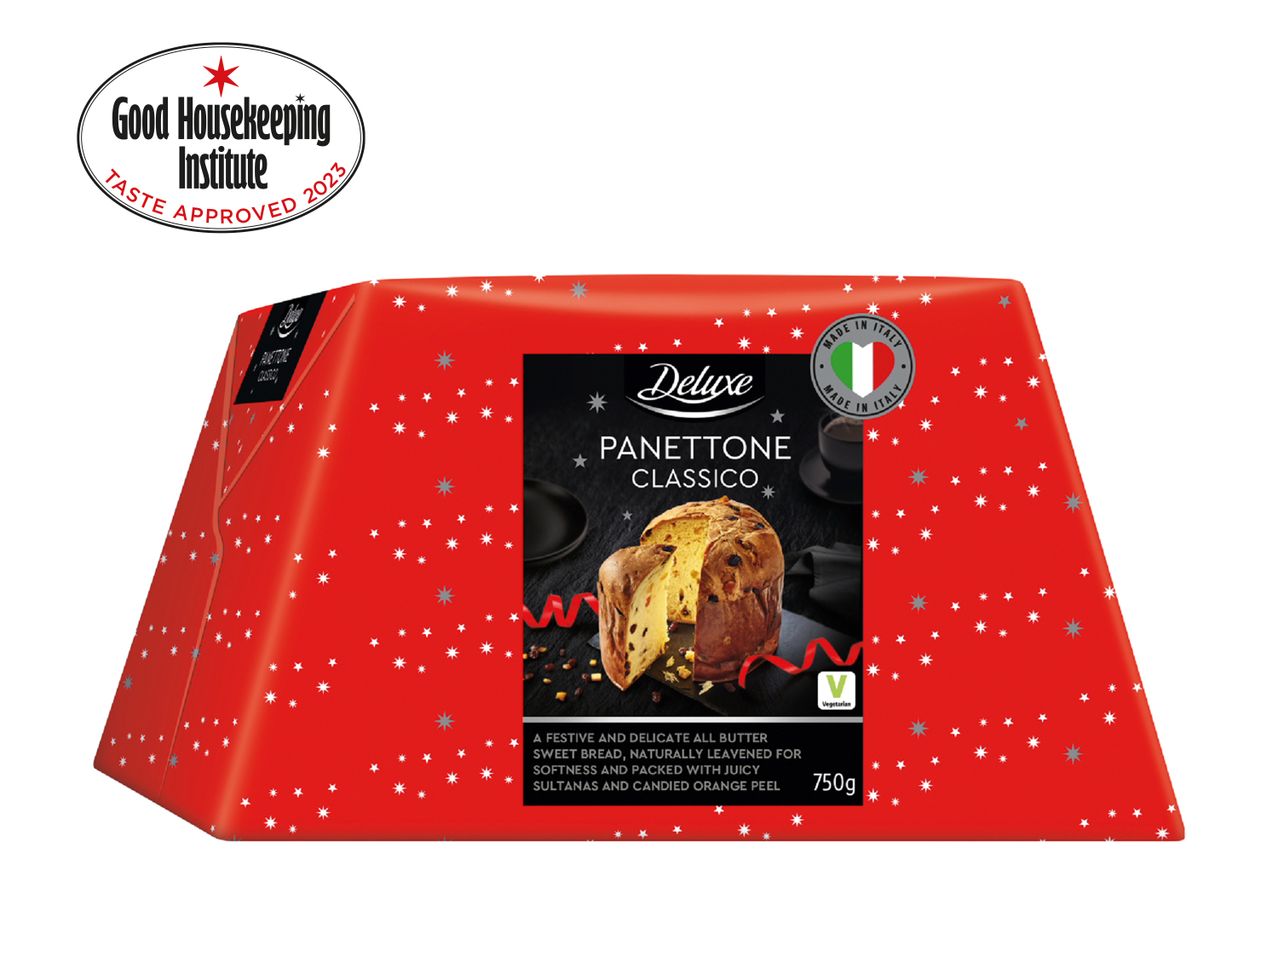 Go to full screen view: Deluxe Panettone Classico - Image 1